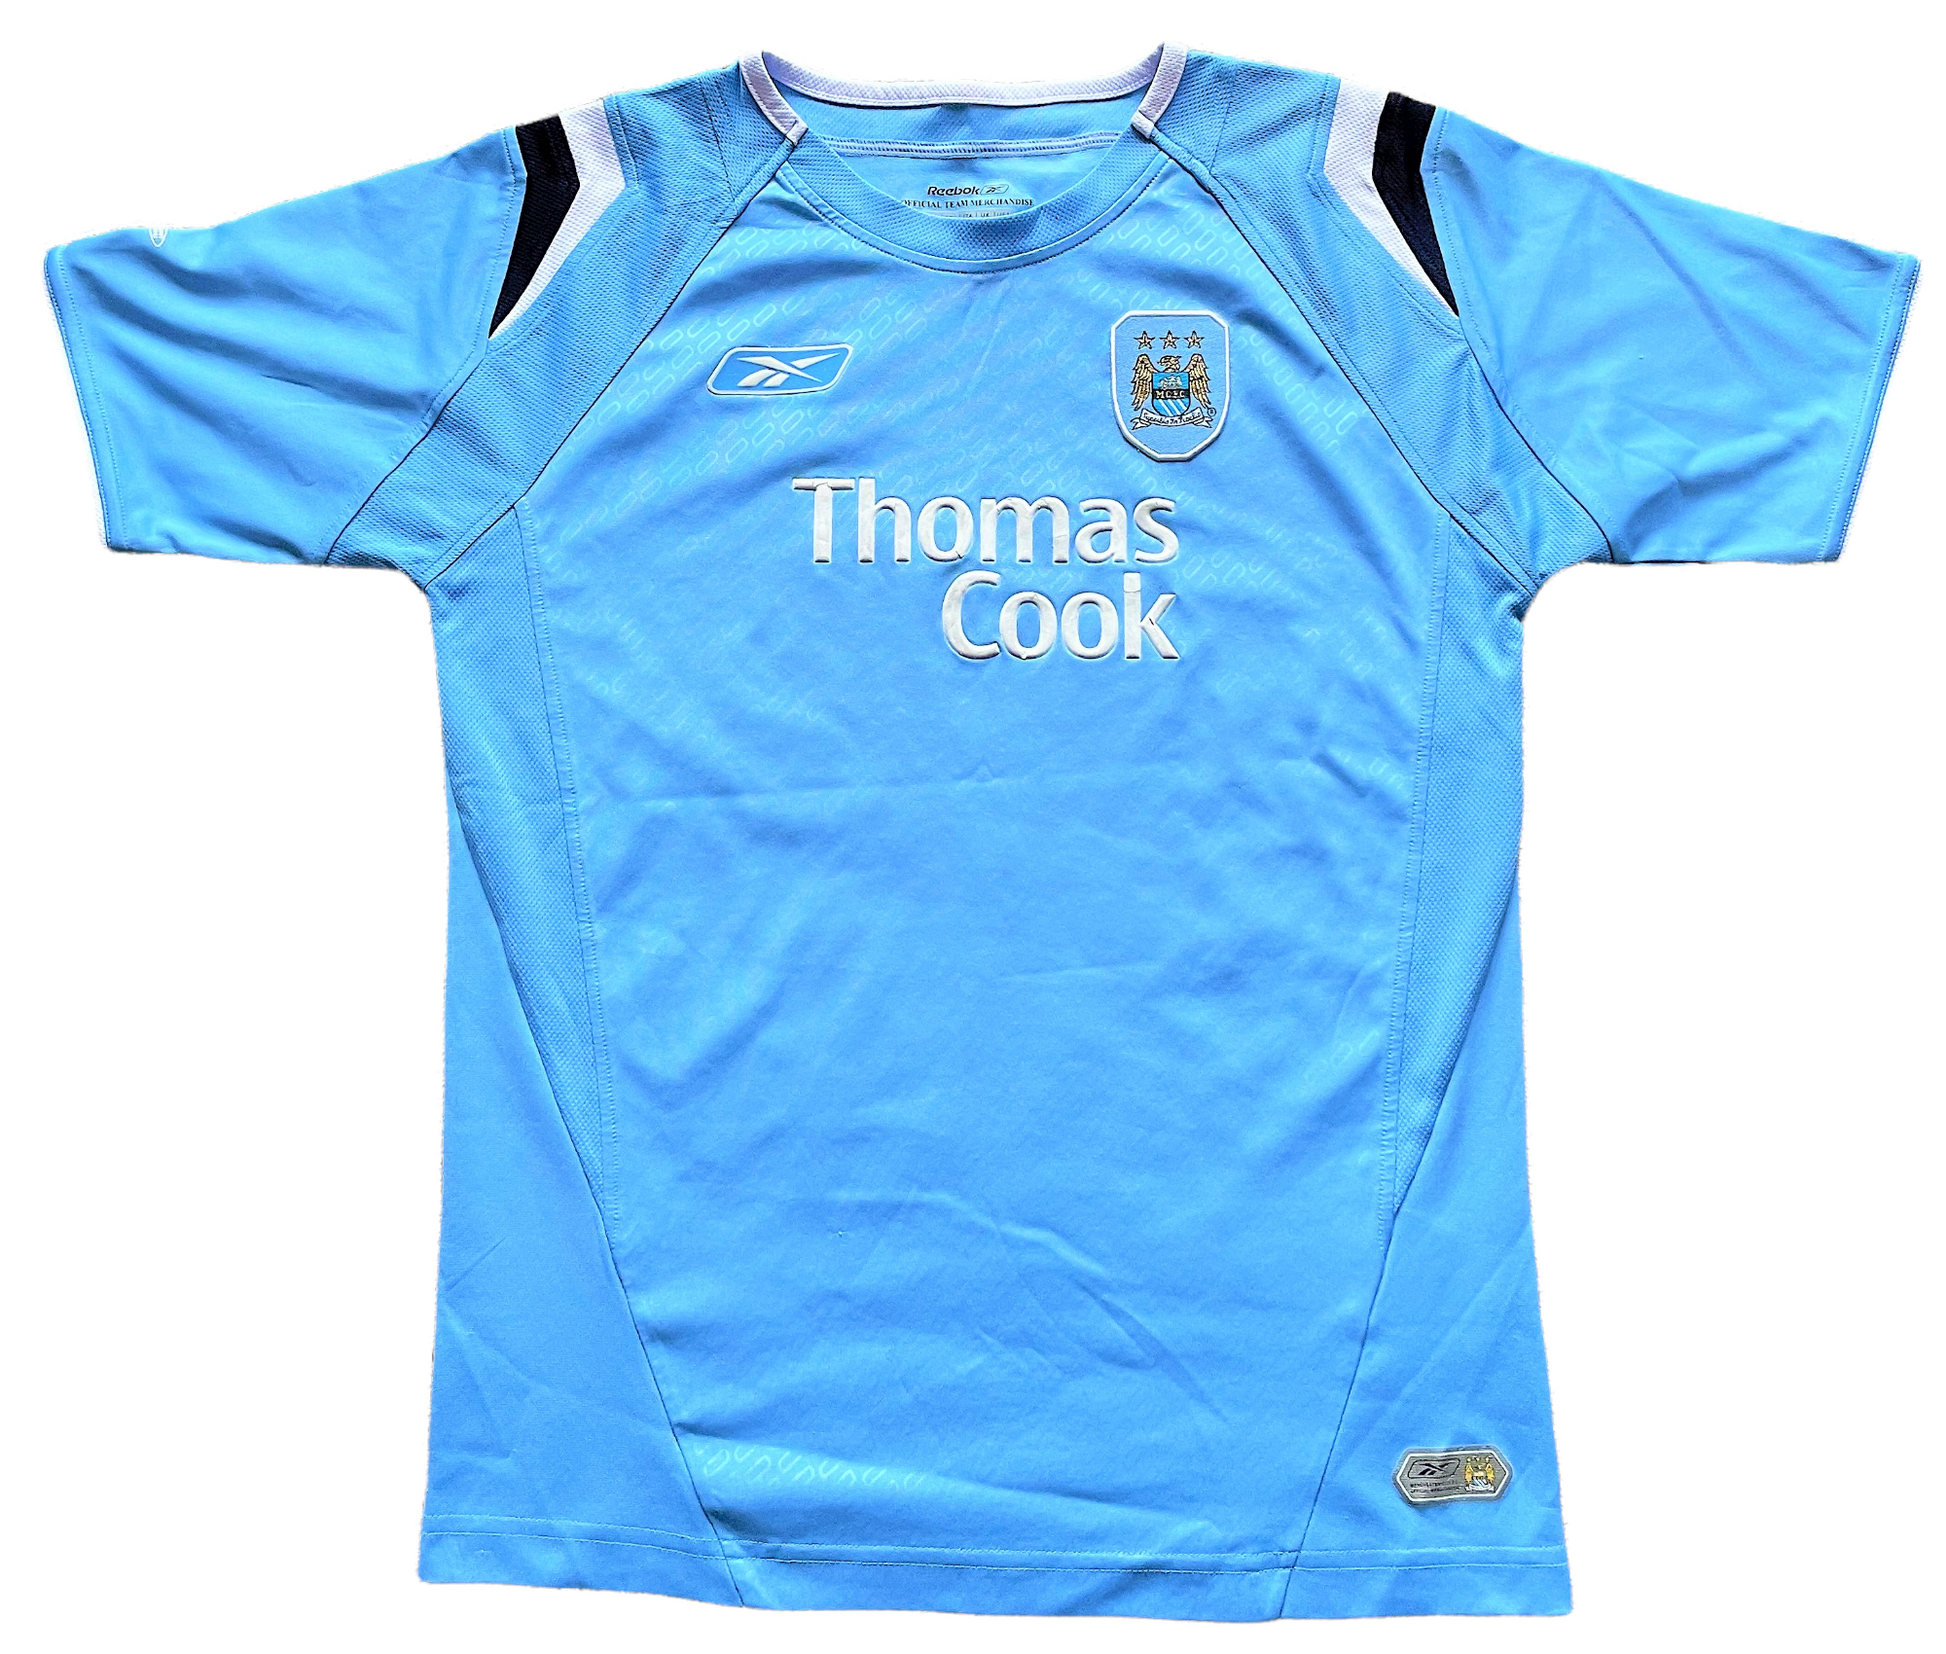 2004-06 Manchester City Home Shirt (very good) Youths 30-32